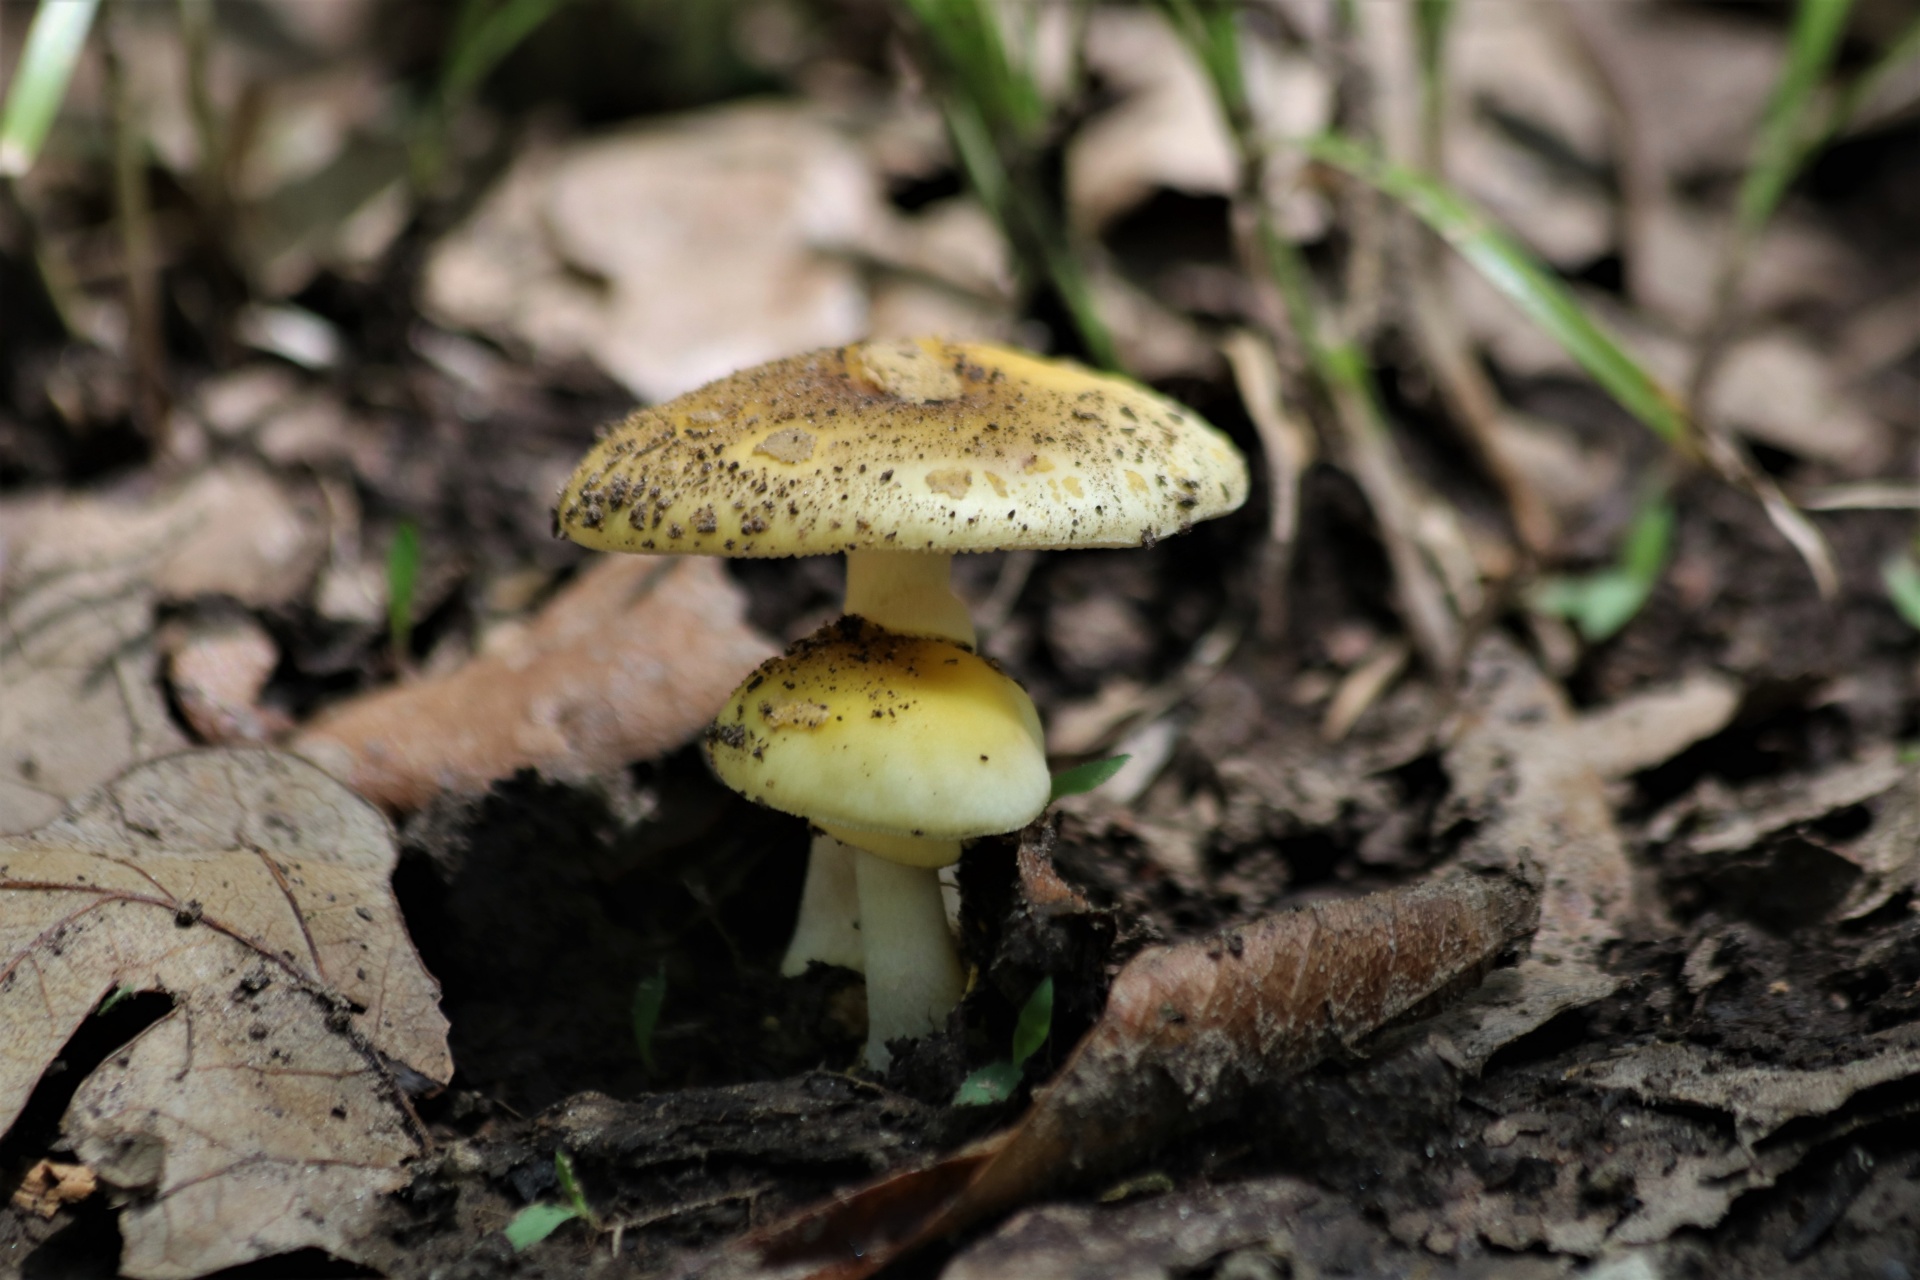 Close-up of two little yellow mushrooms growing among leaves and green grass in spring.